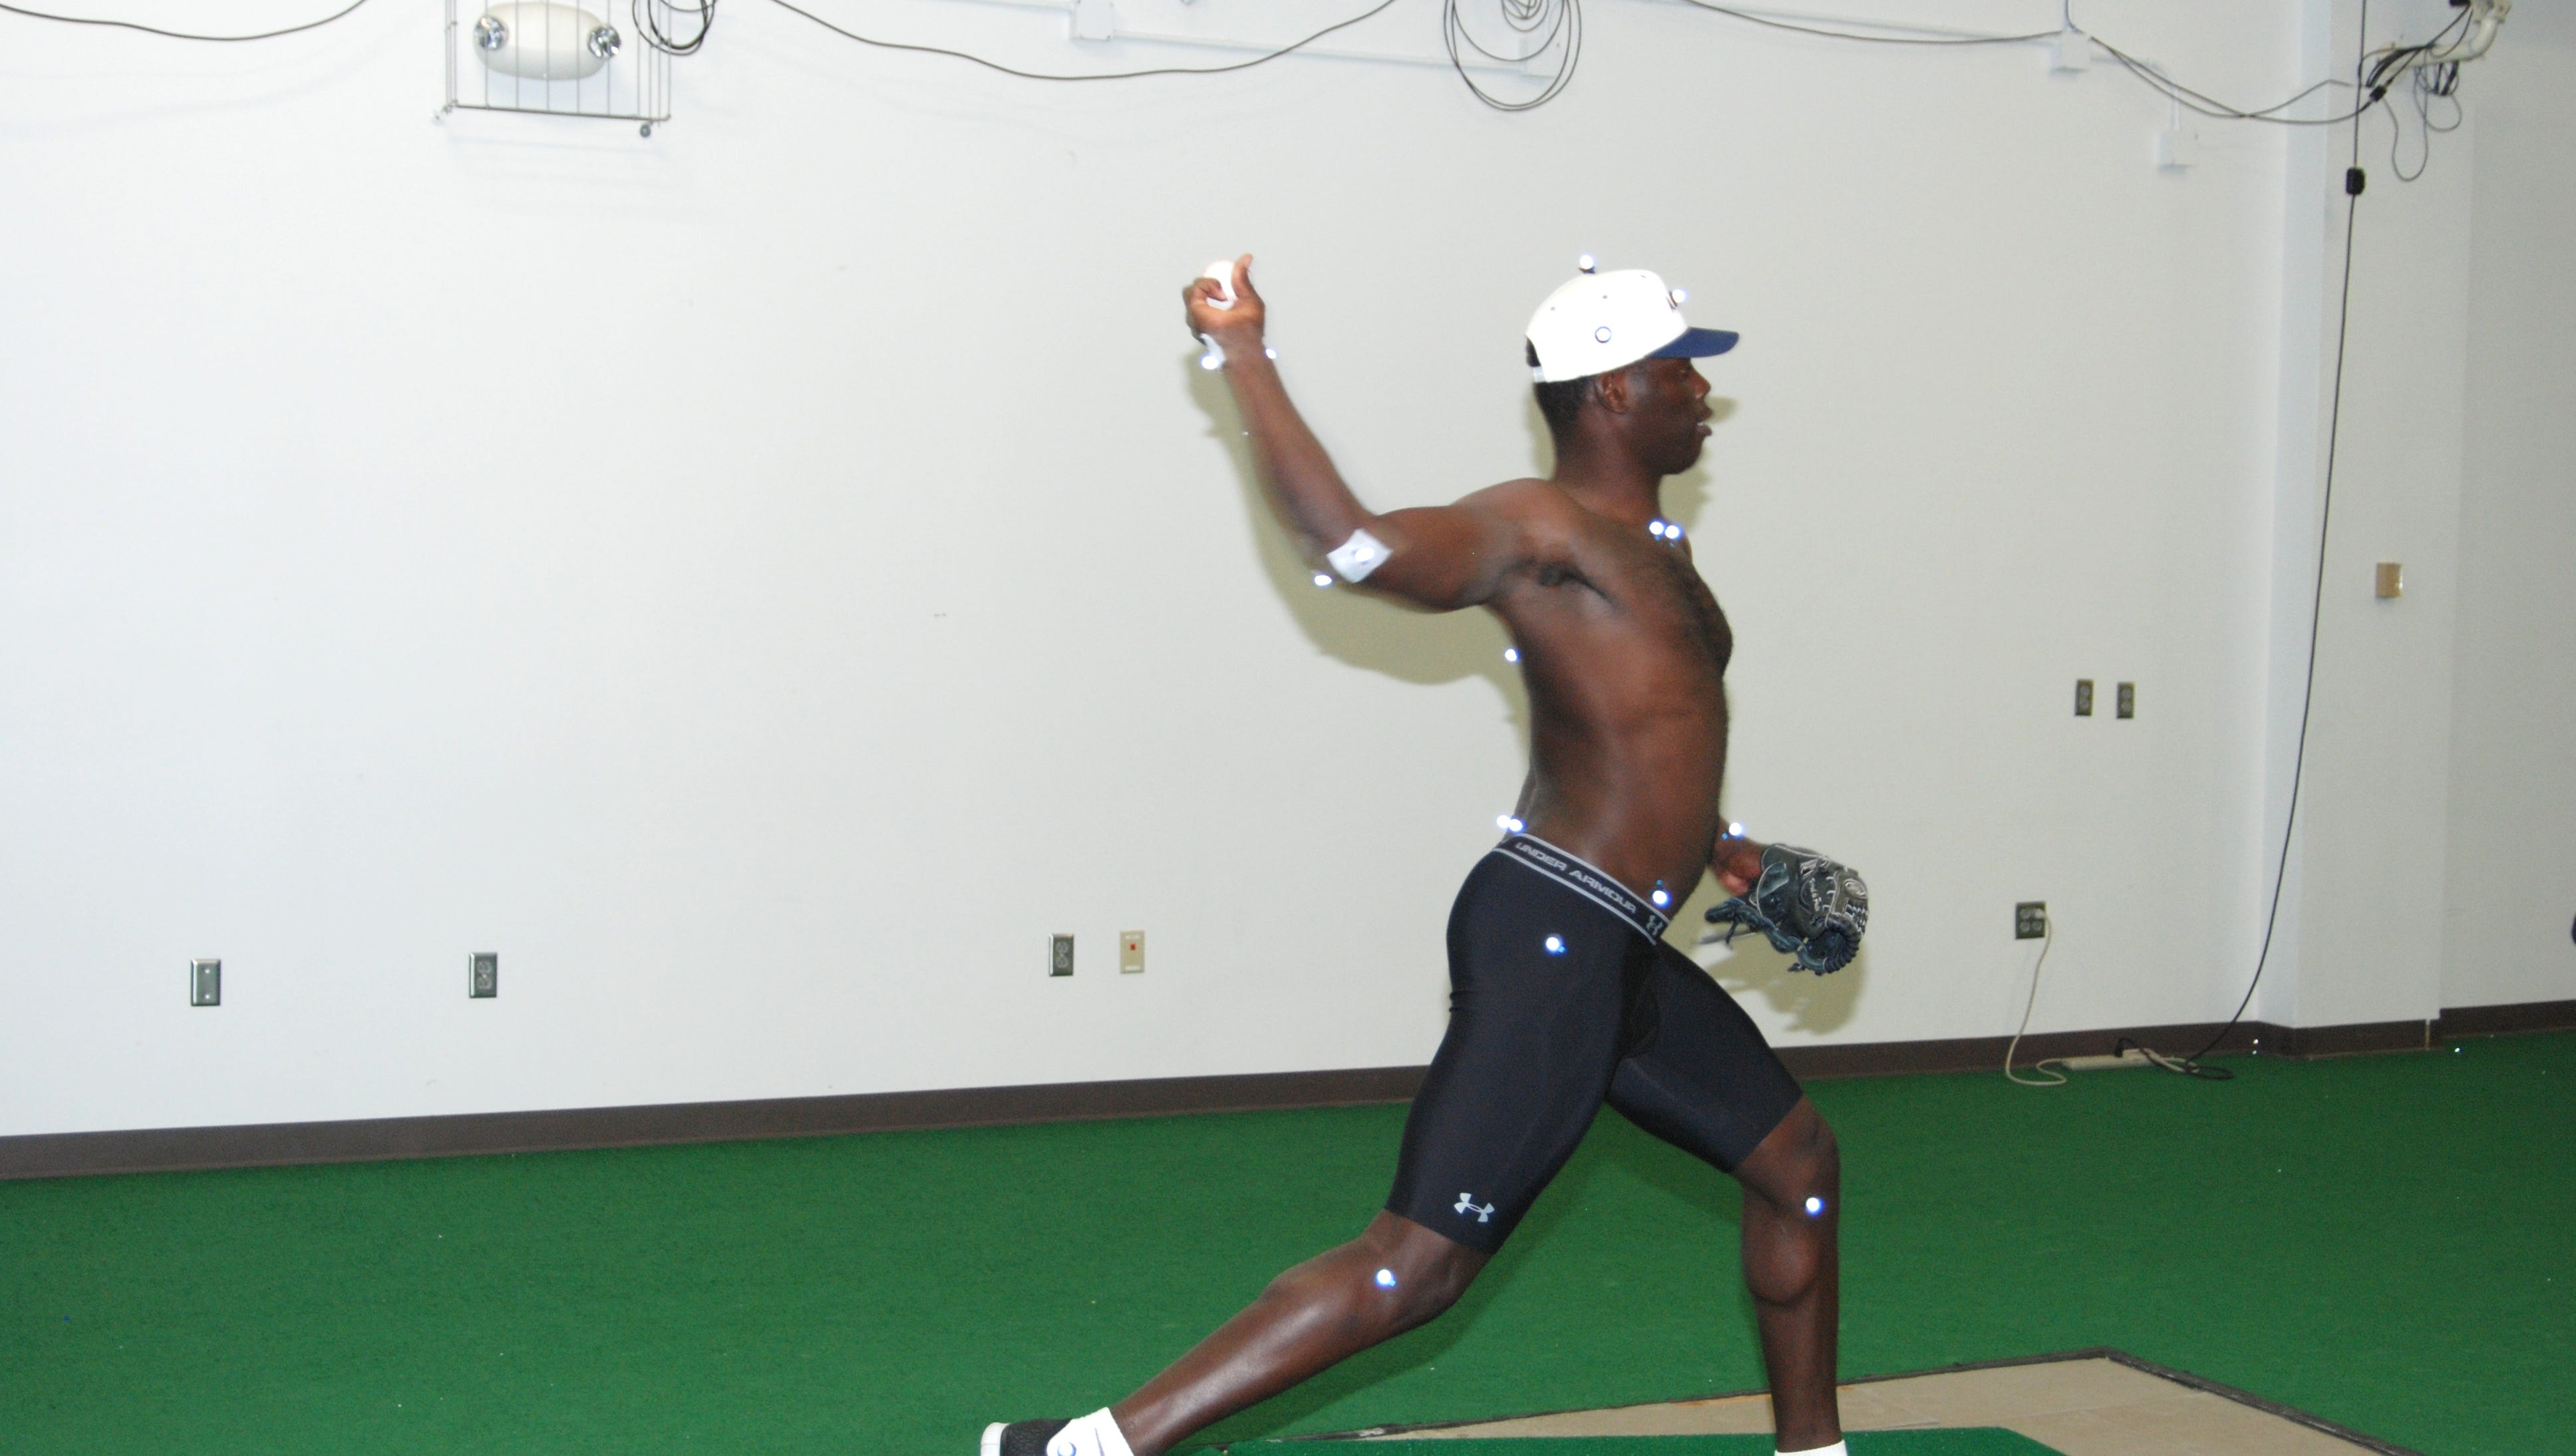 Science of baseball evolving: Help pitchers avoid injuries